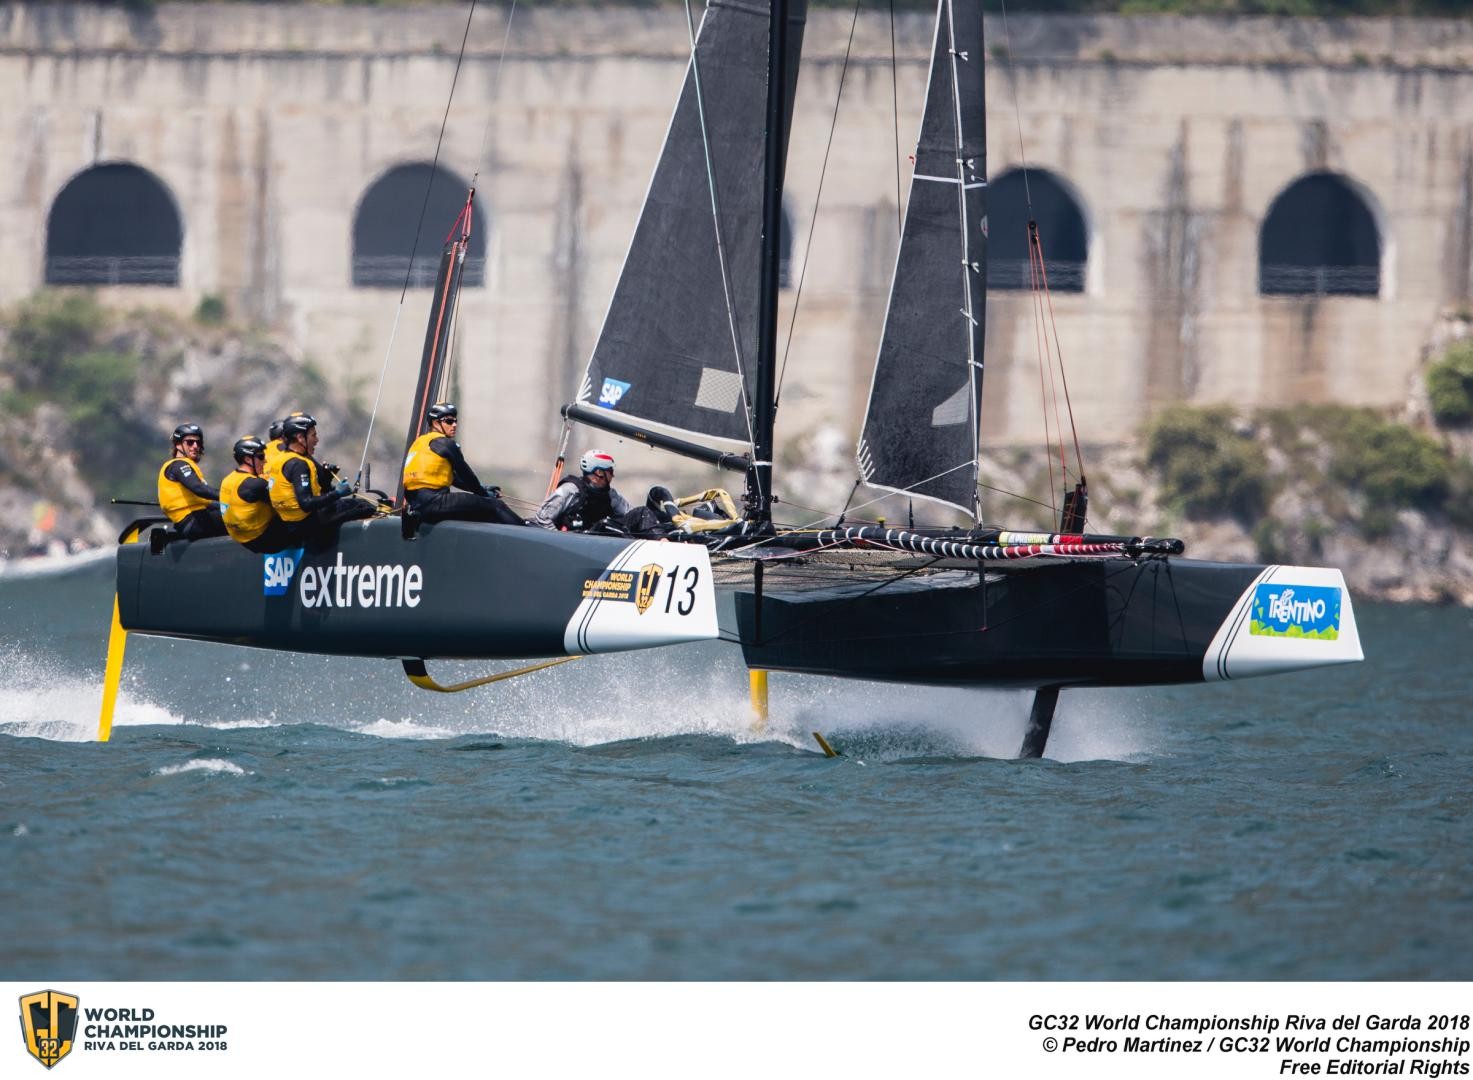 SAP Extreme Sailing Team scored three bullets today and with the wind in the high teens was foiling upwind